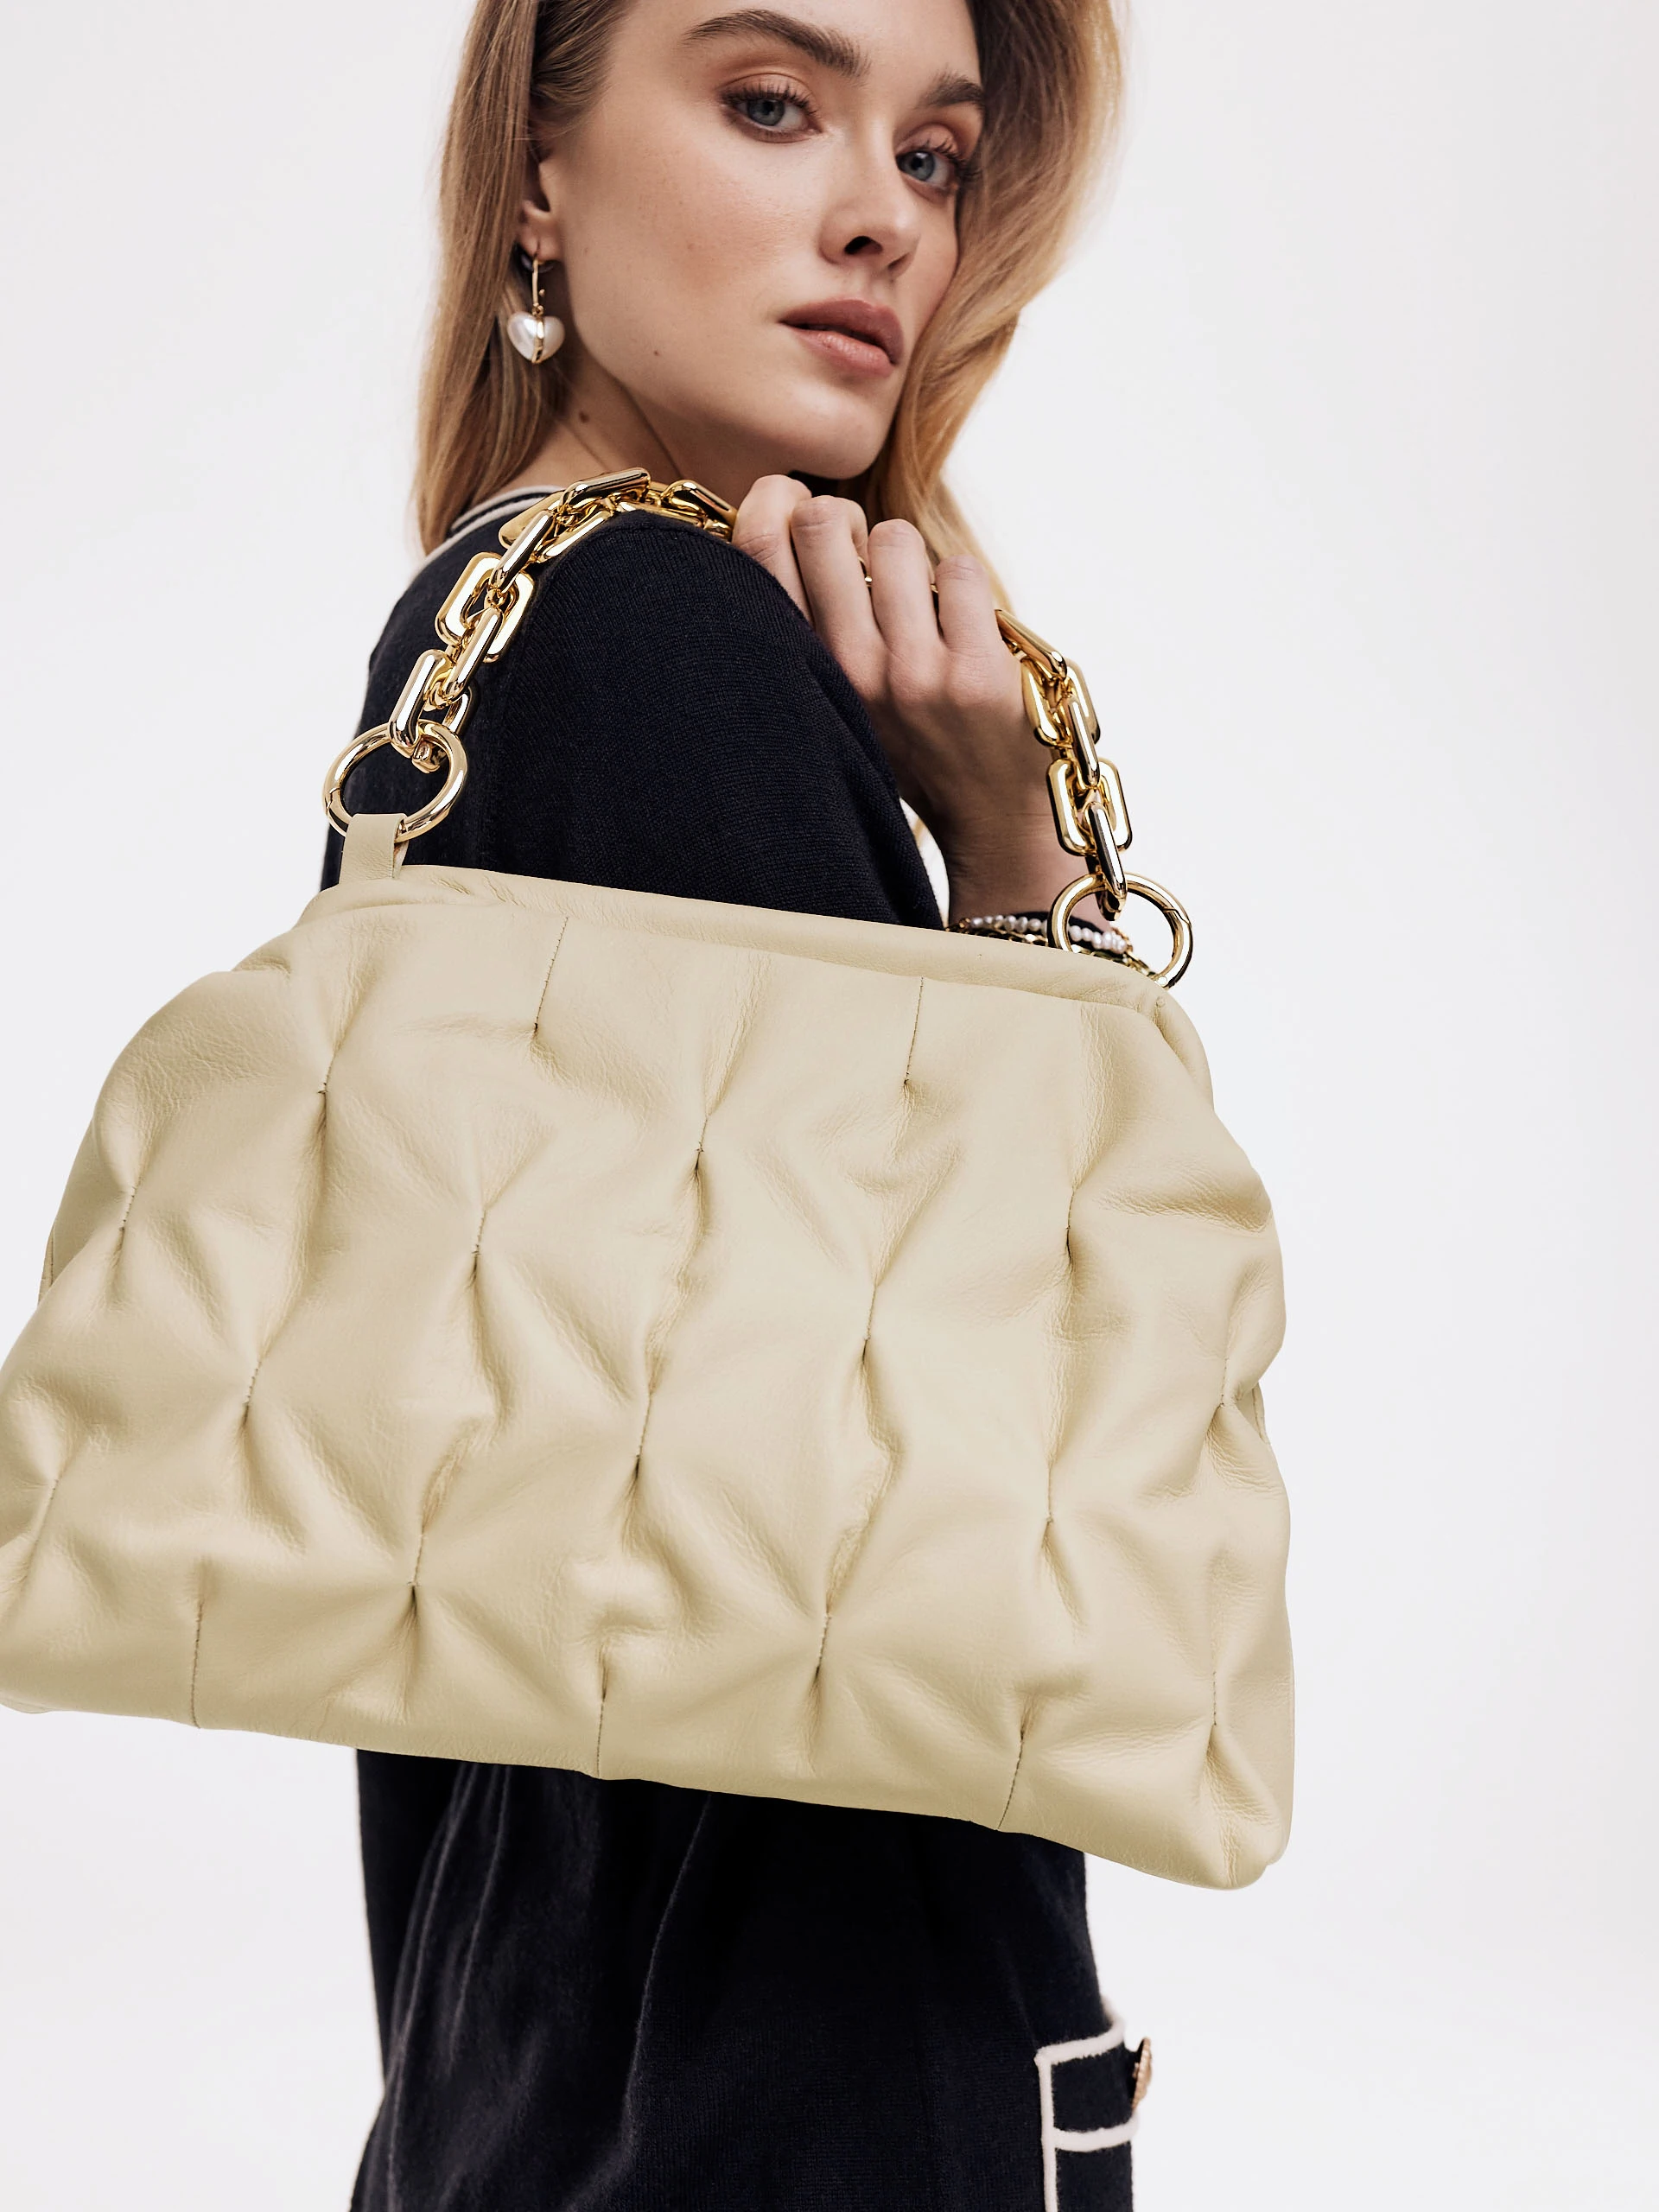 Beige bag with chain